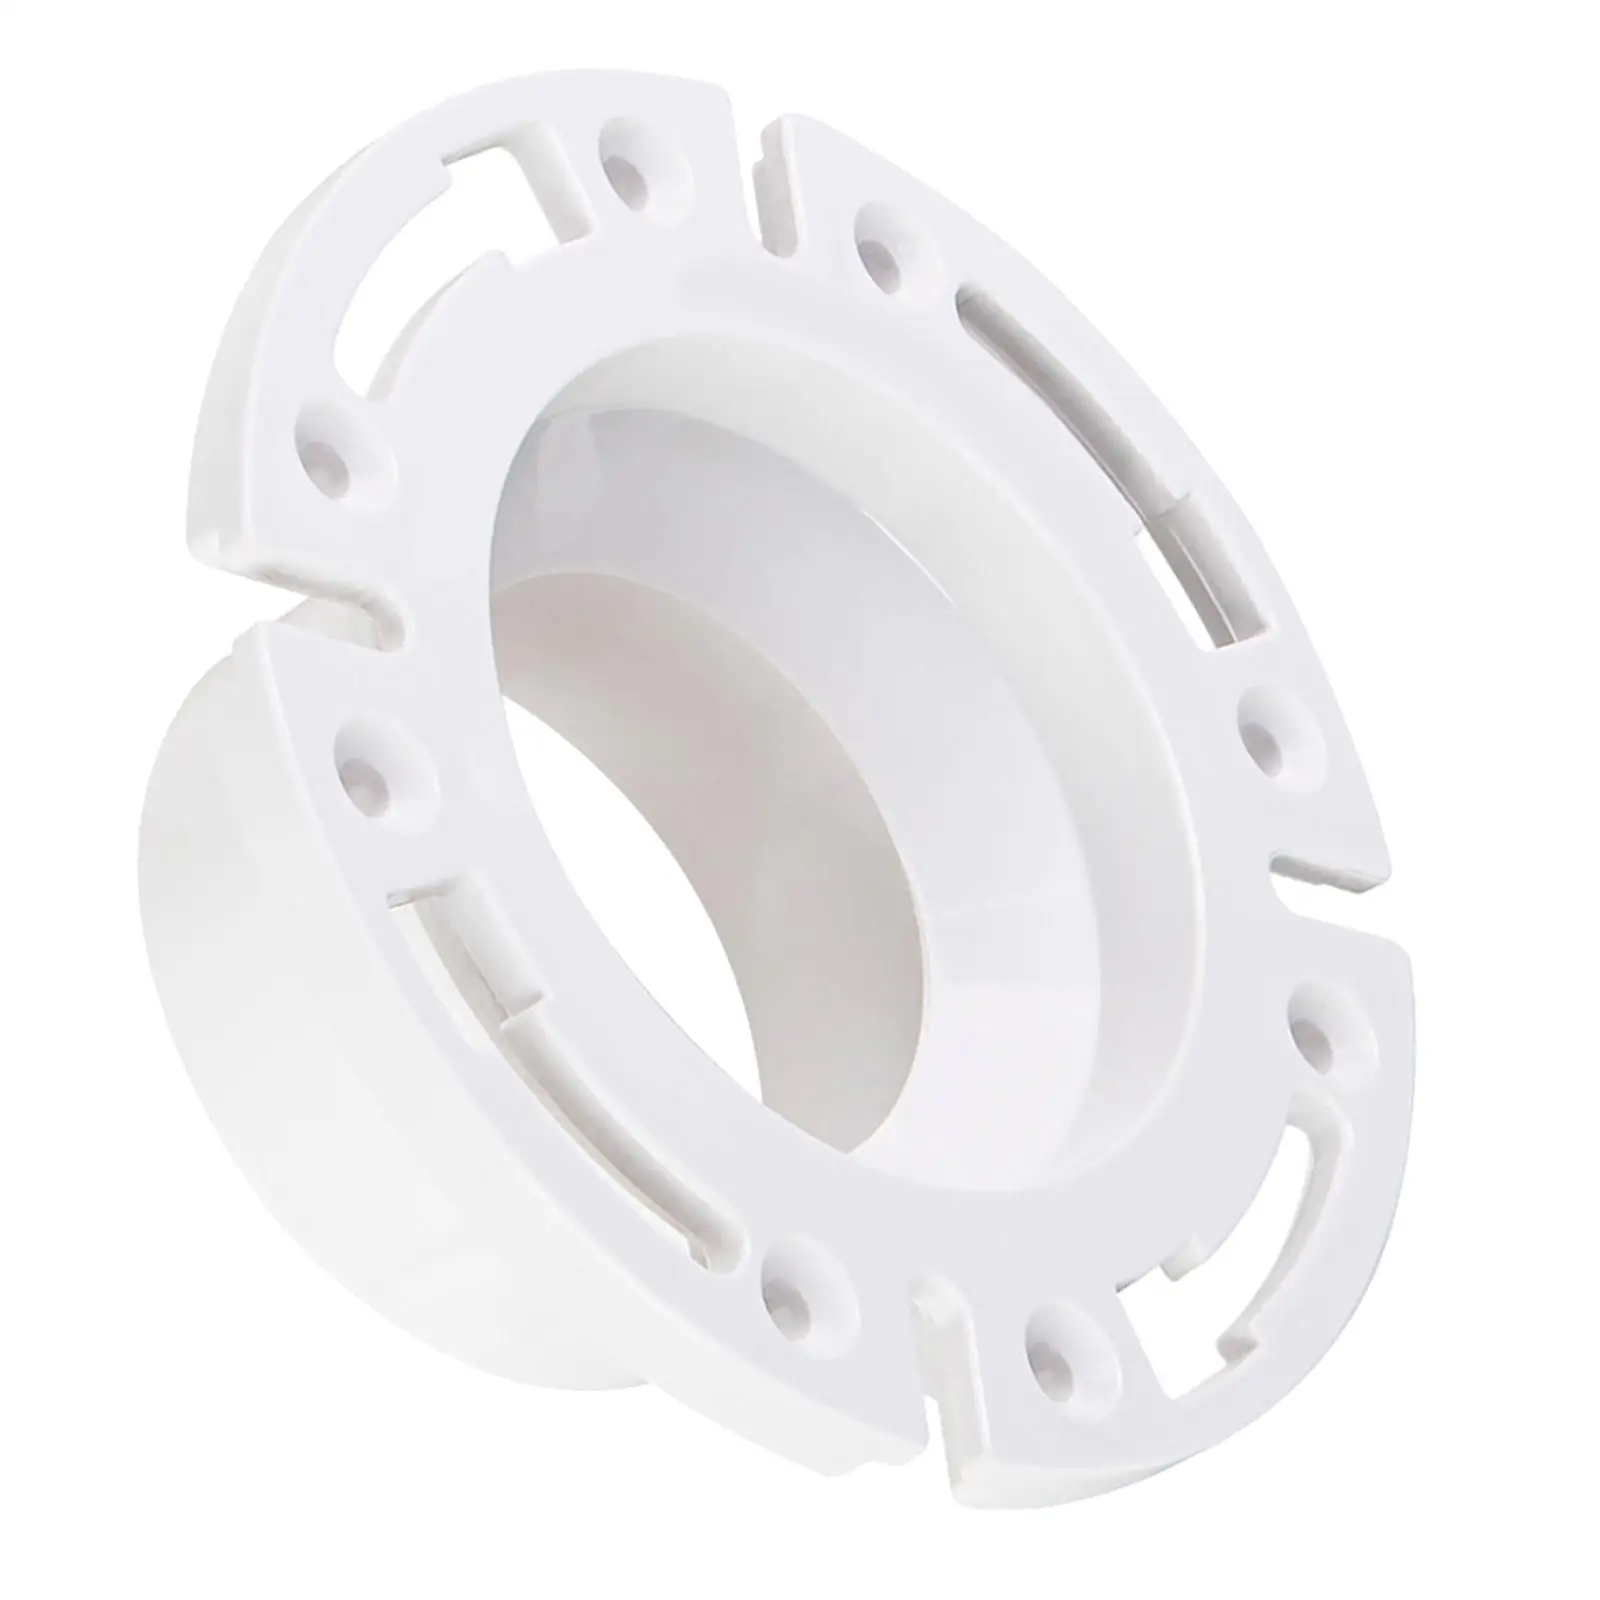 Toilet INSTALL Flange Long Service Life Accessories RV Toilet for 4410